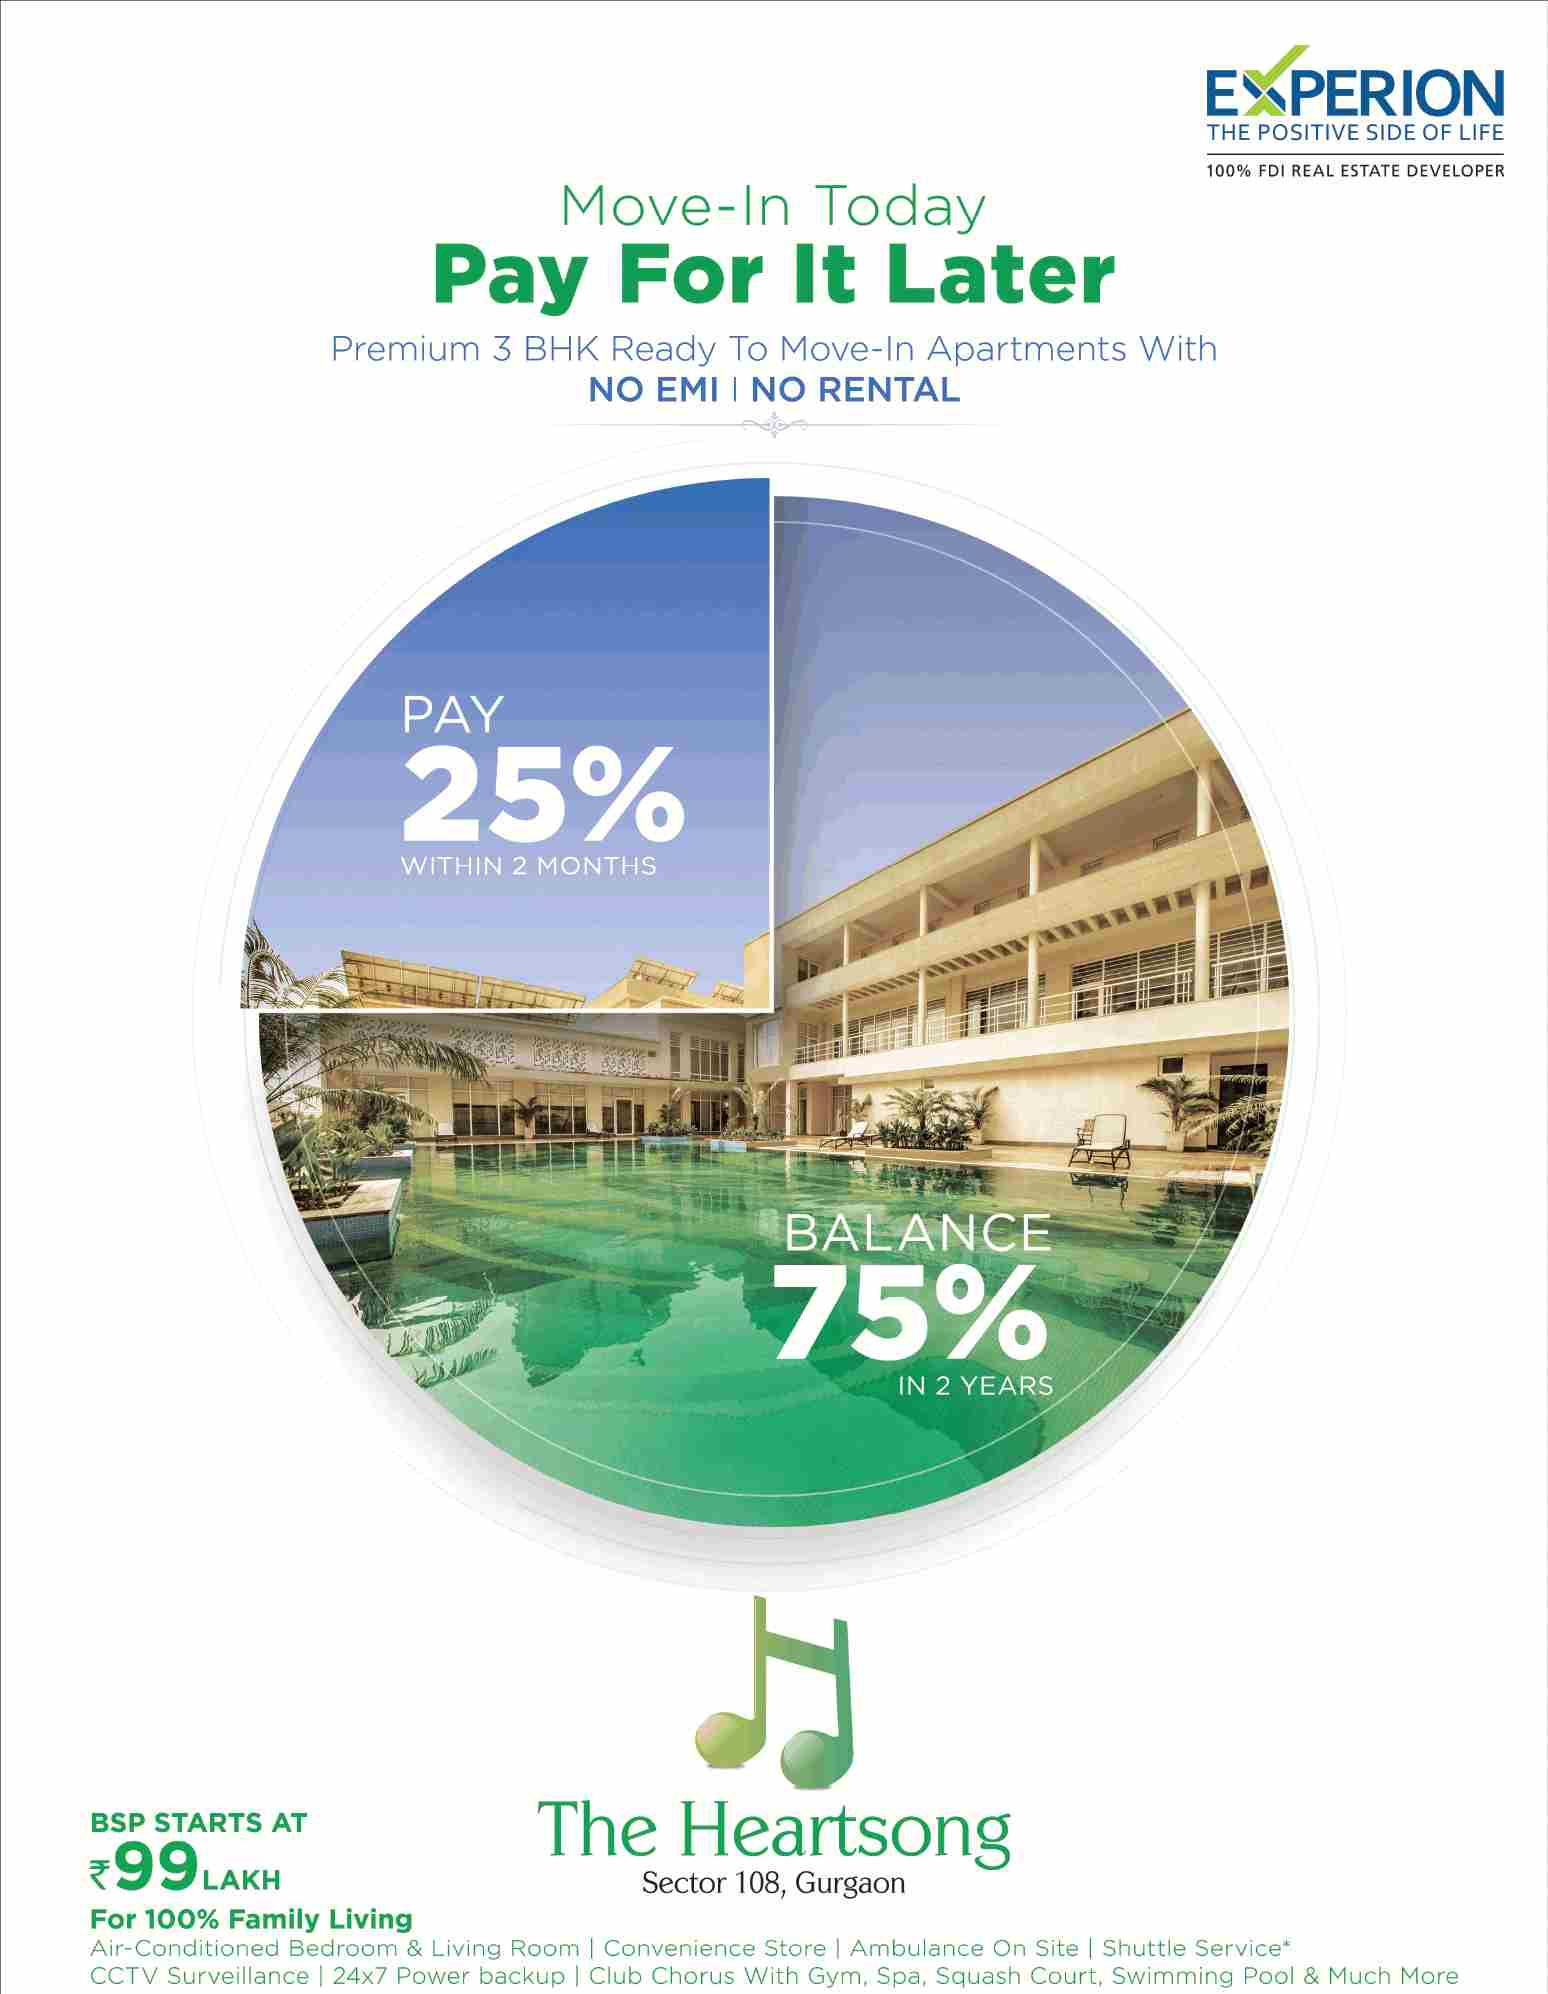 Pay 25% in 2 months and balance 75% in 2 years at Experion The Heartsong in Gurgaon